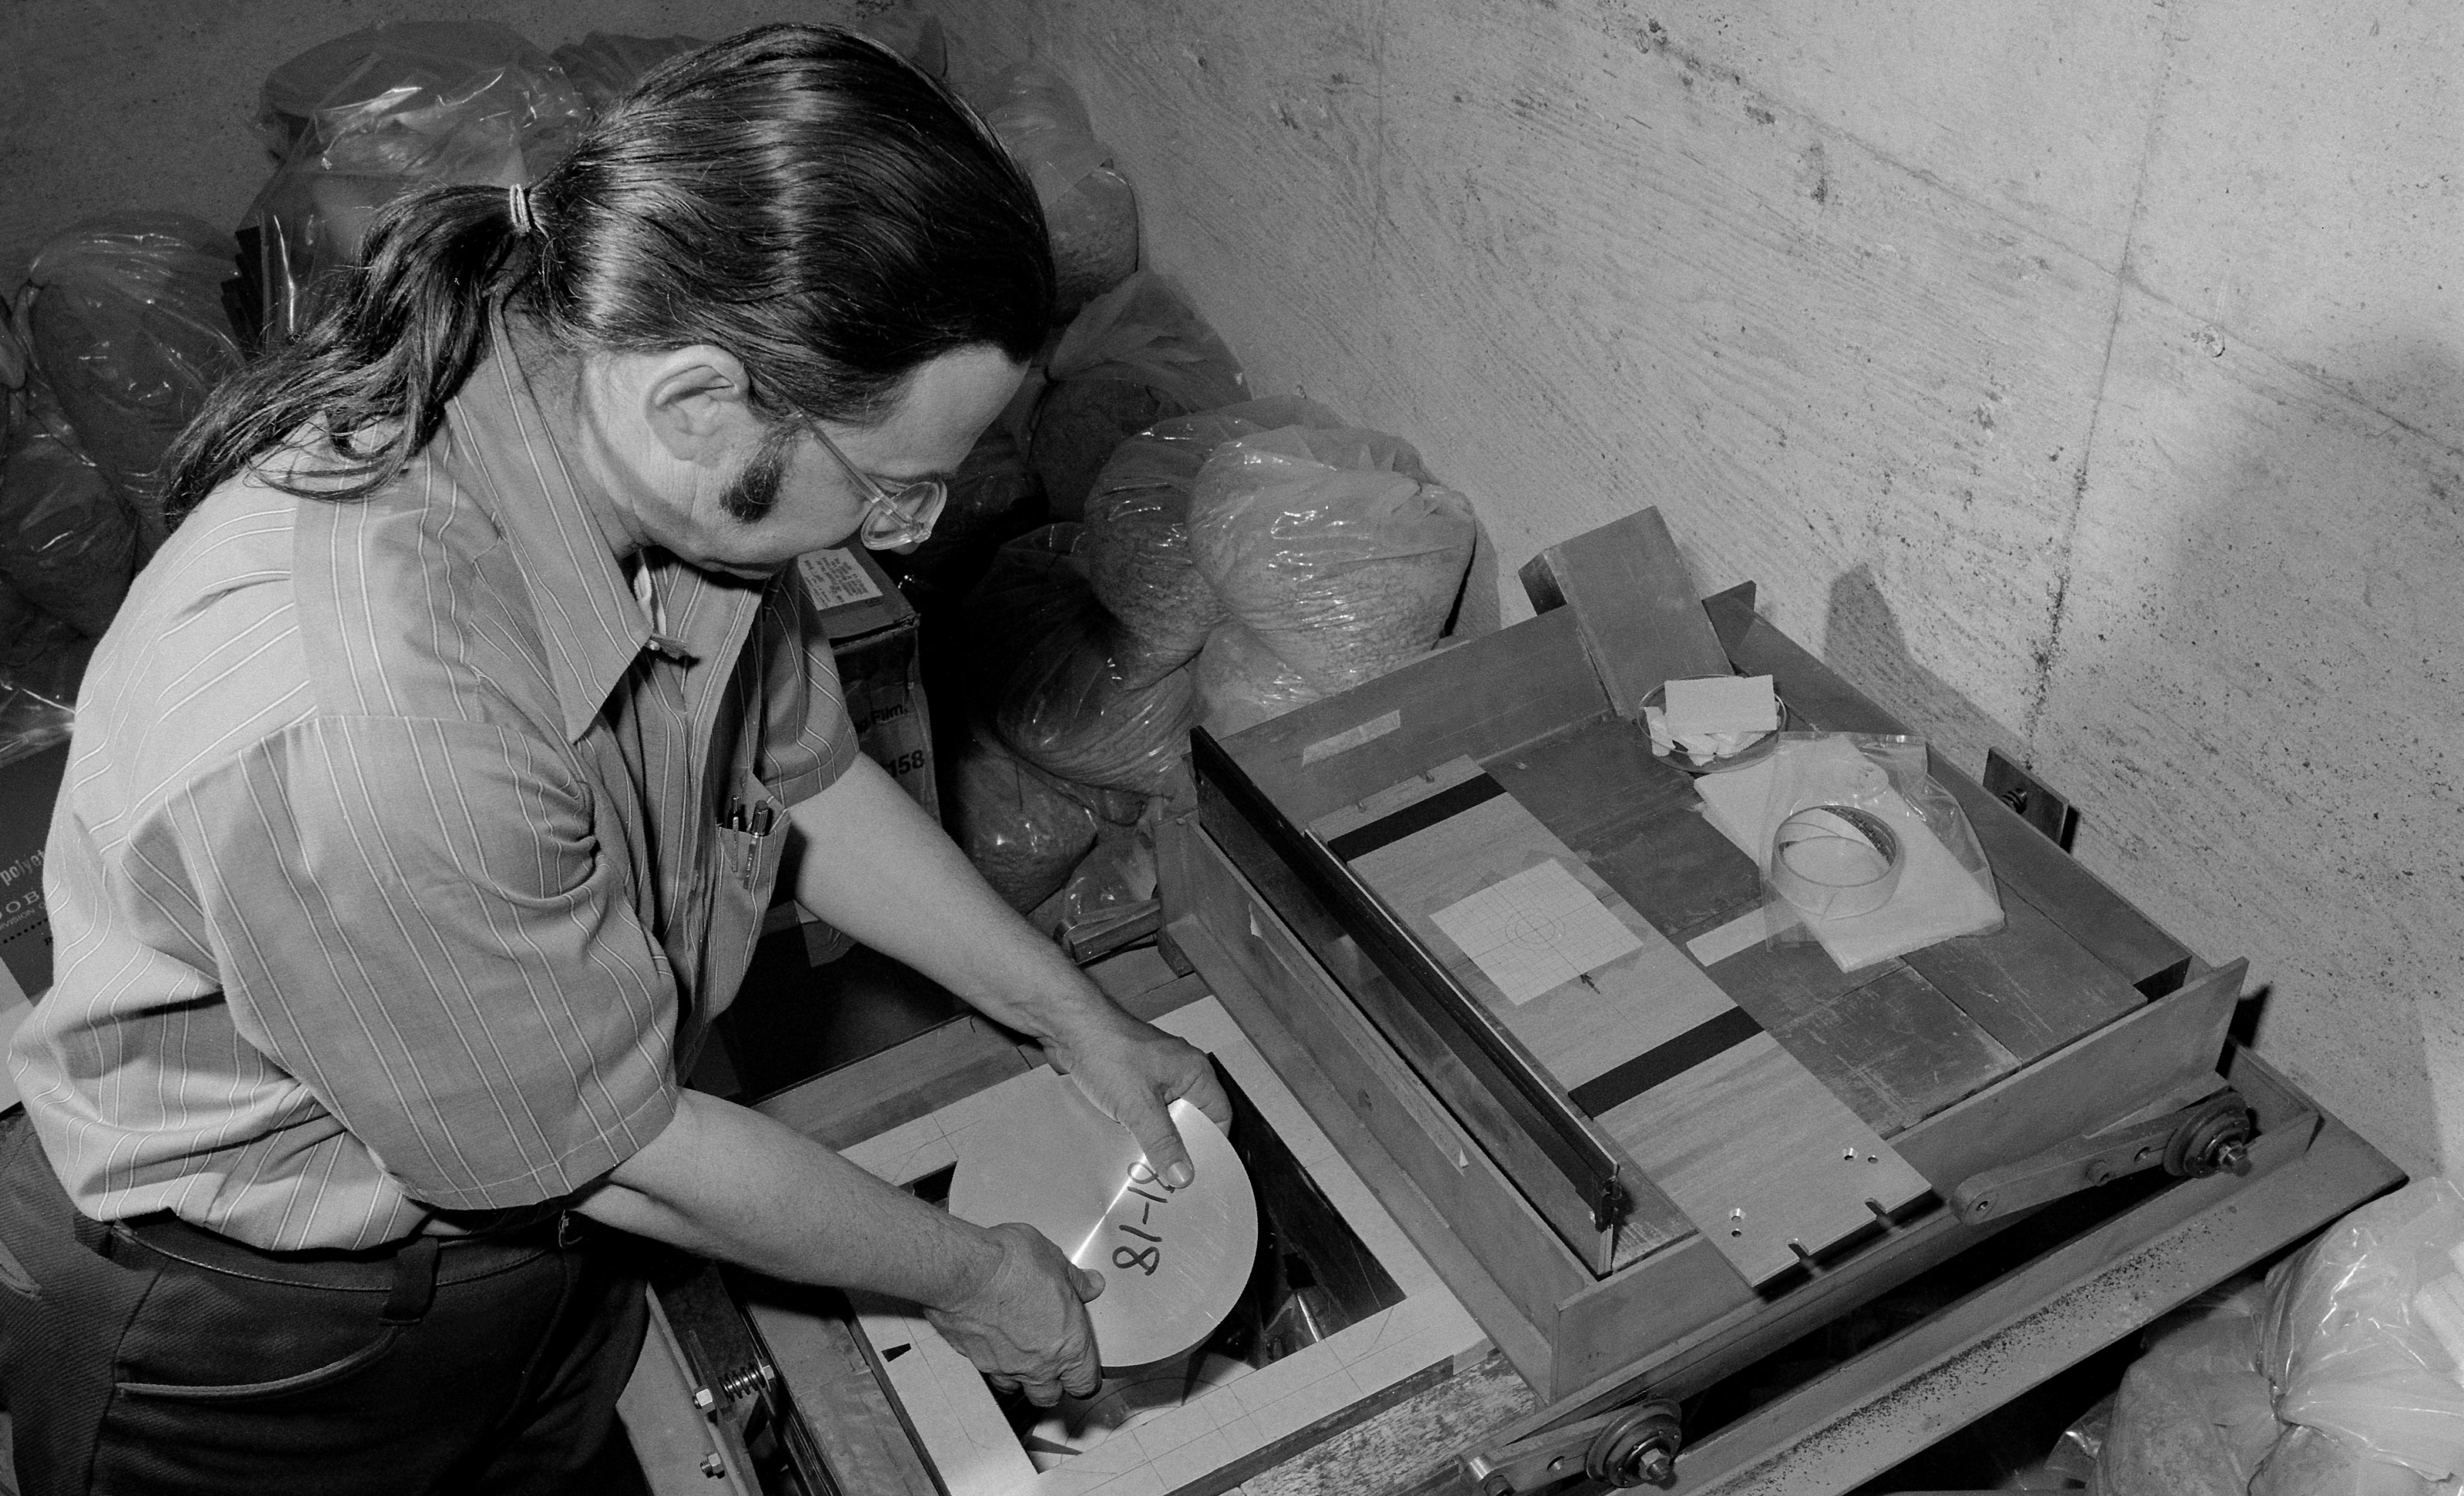 Photo - Alan “Al” Smith places an aluminum sample exposed to radiation at Berkeley Lab’s Bevatron accelerator into a lead and concrete box containing a detector at a low-level radiation counting facility in this 1950s photograph. (Credit: Berkeley Lab)